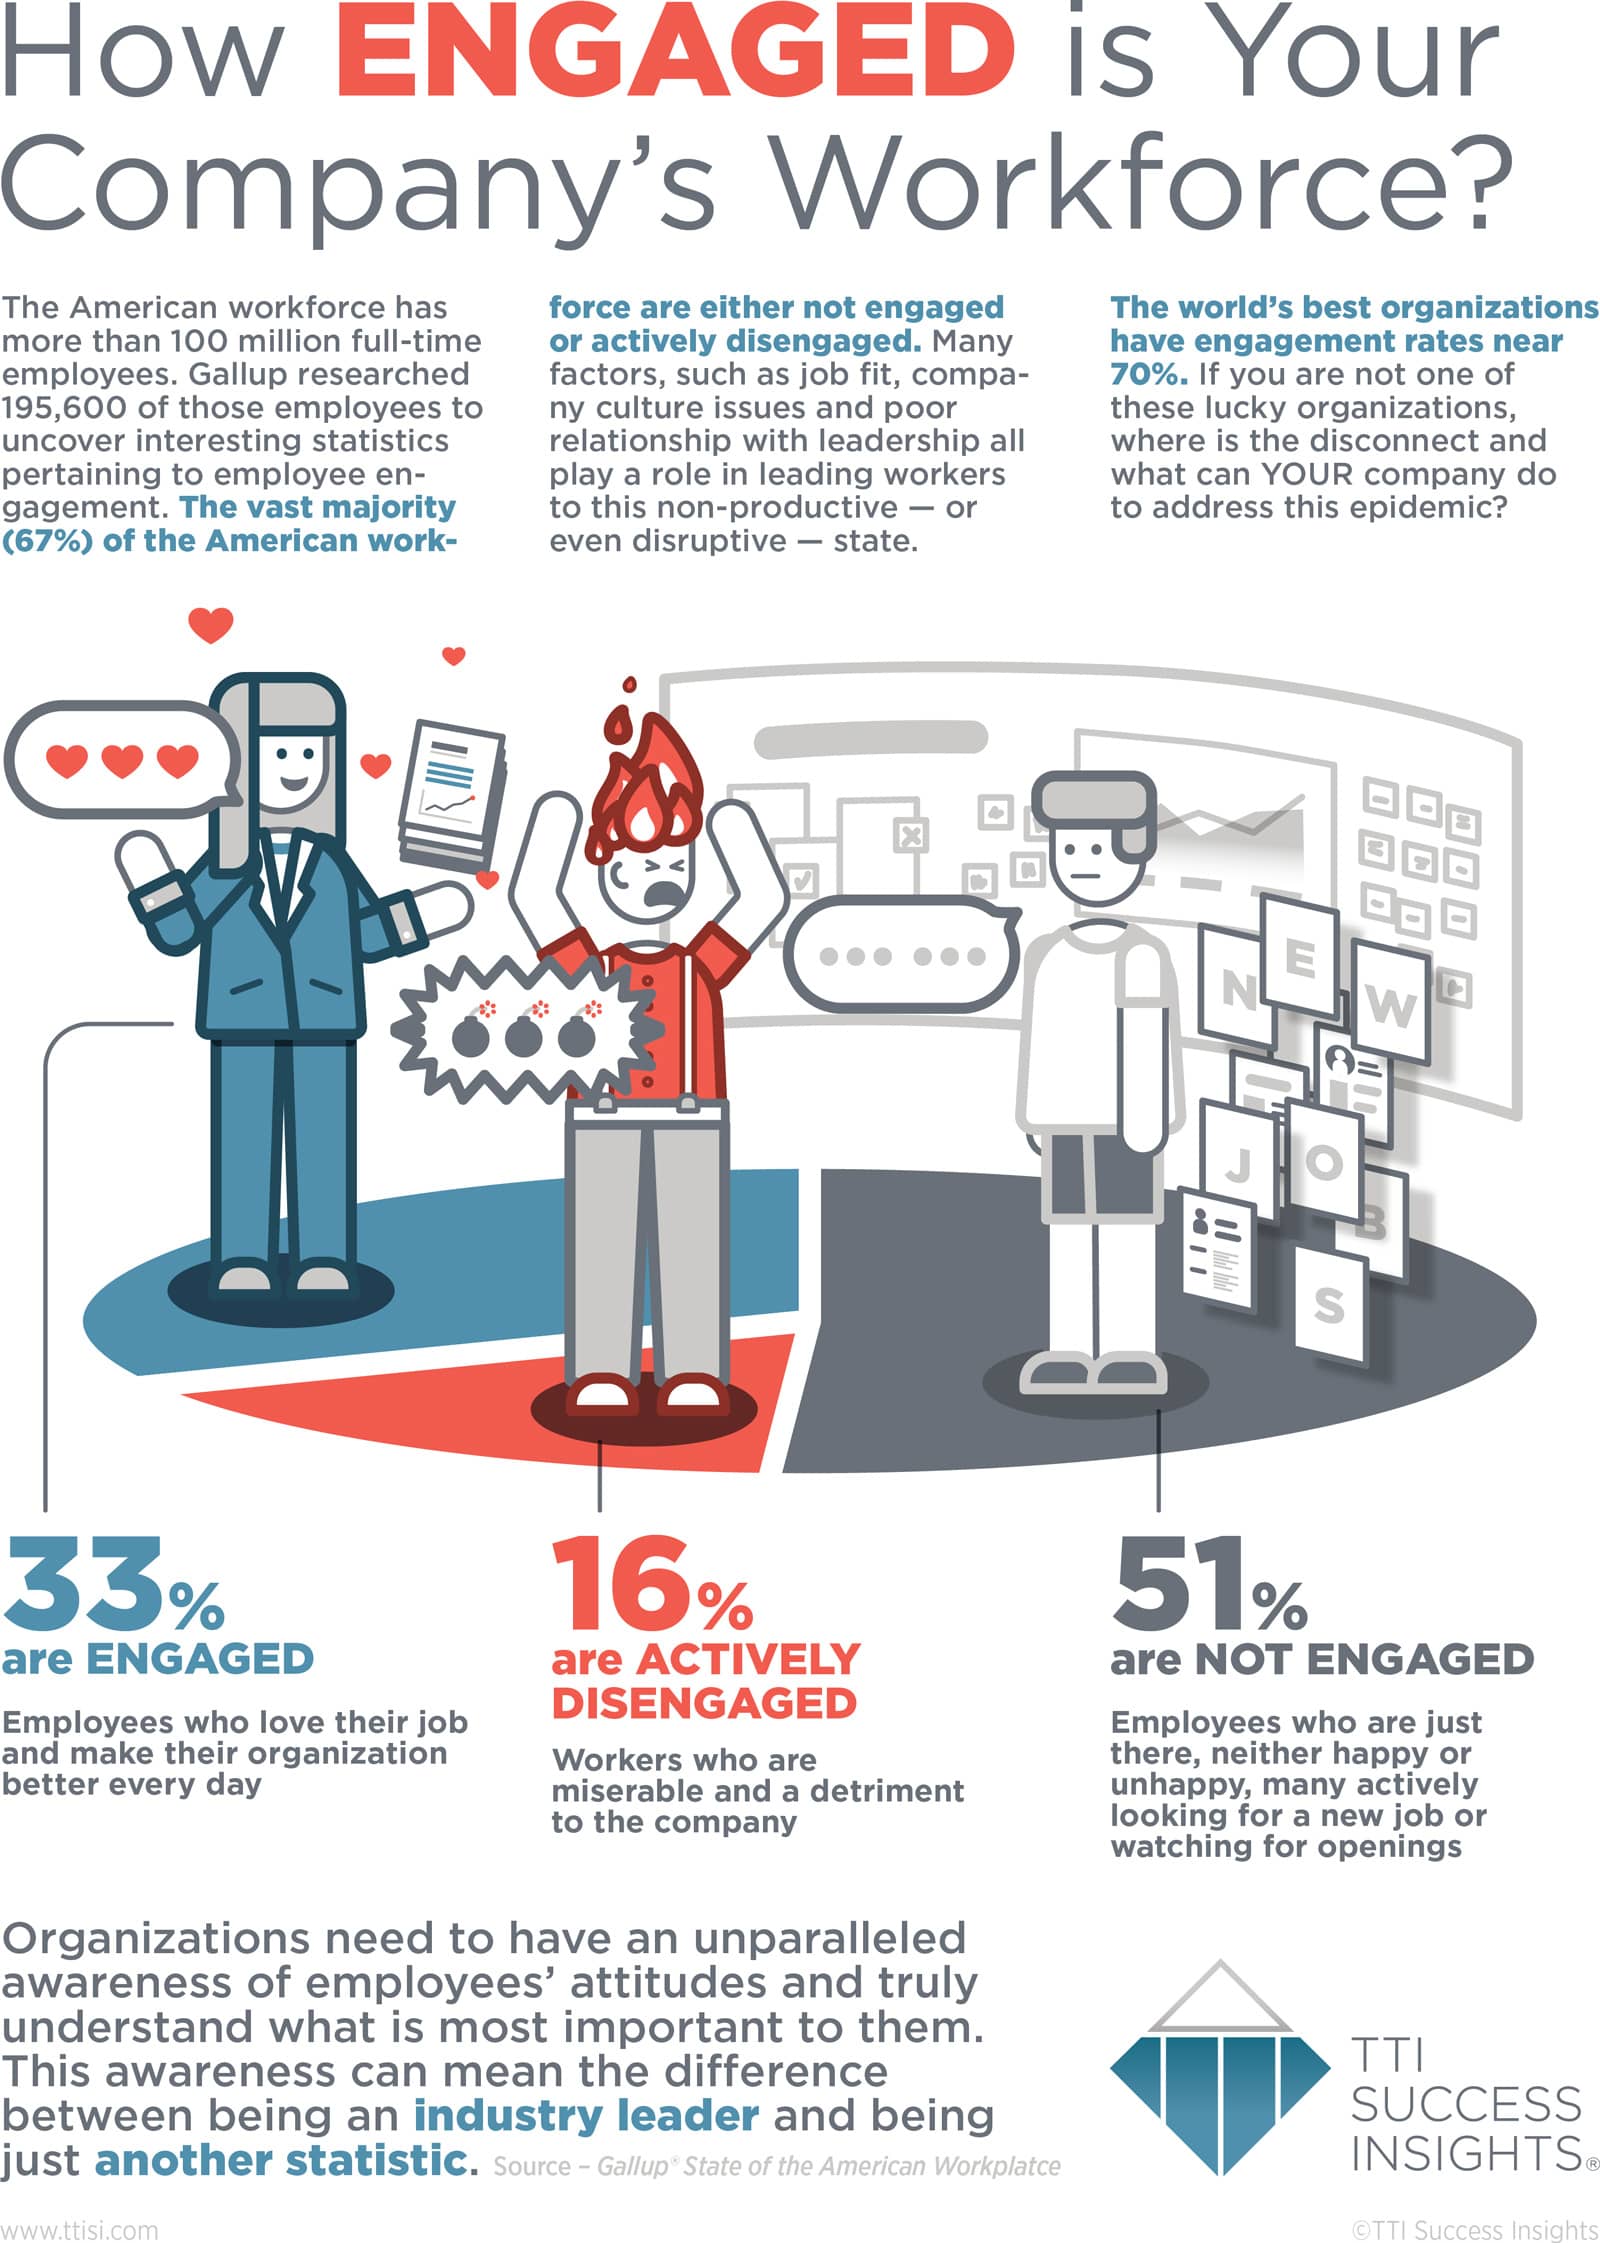 How ENGAGED is Your Company’s Workforce? - Infographic